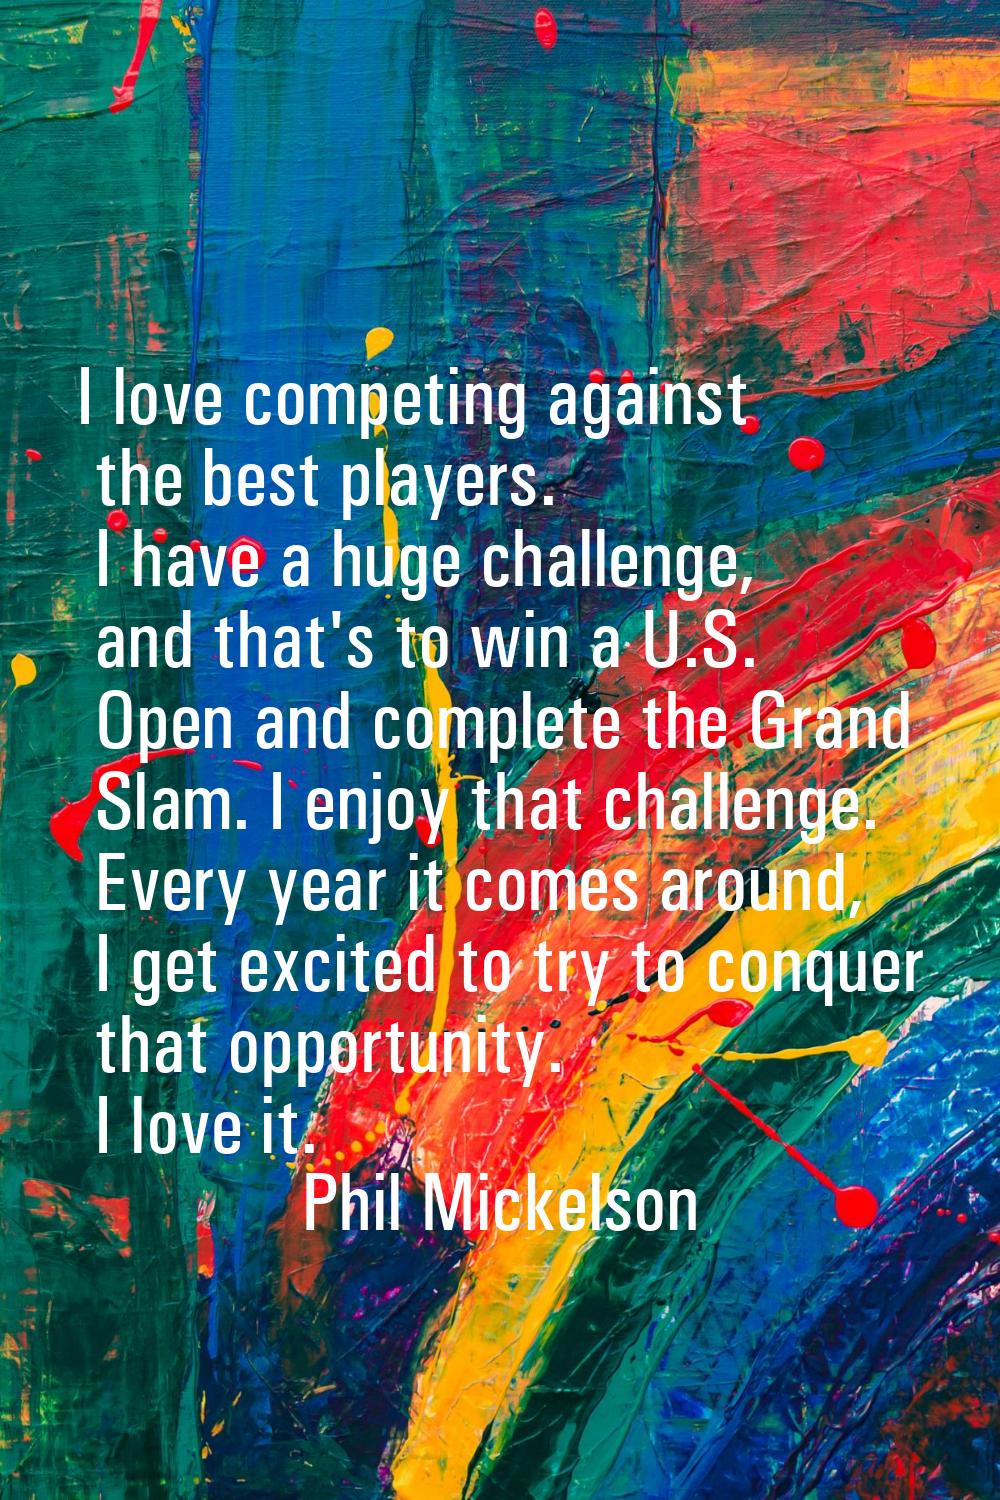 I love competing against the best players. I have a huge challenge, and that's to win a U.S. Open a